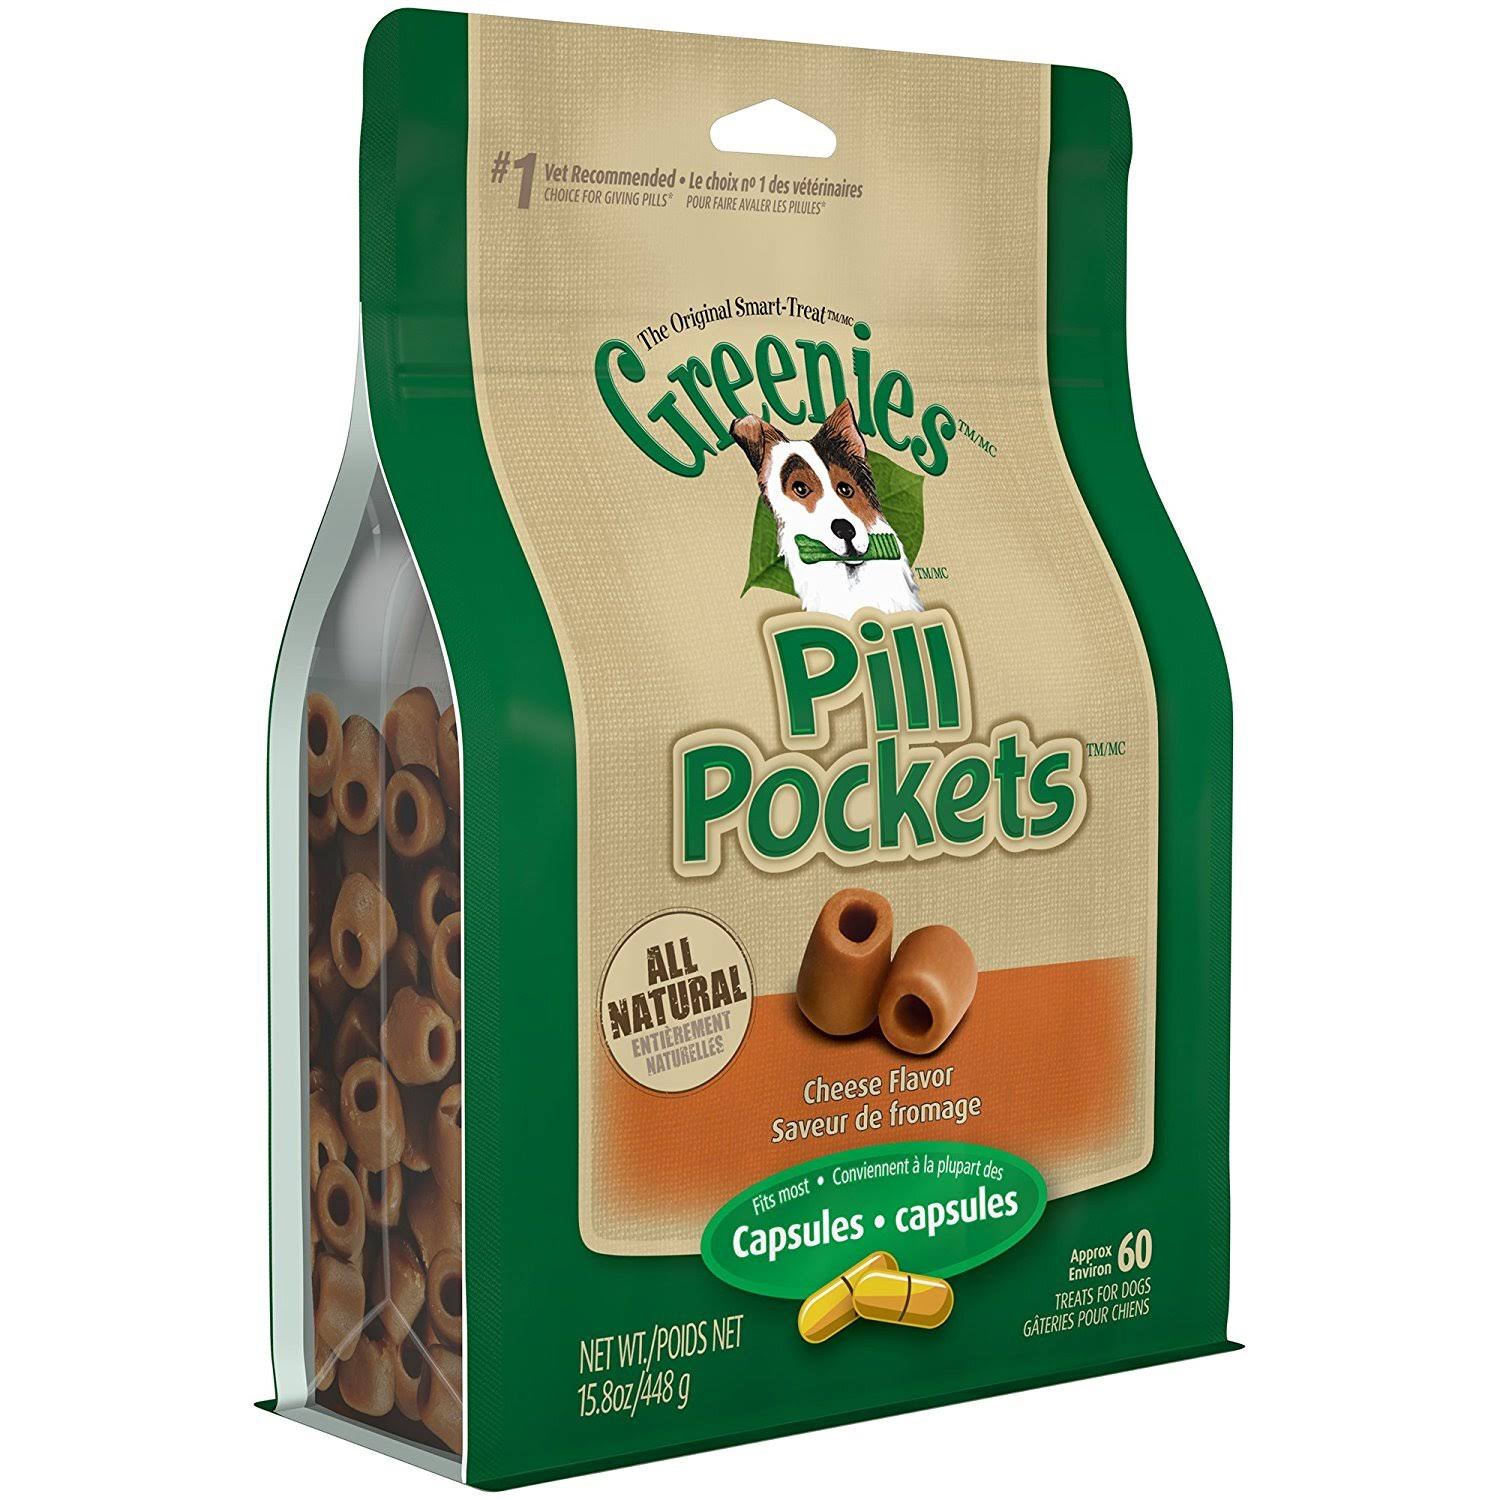 Greenies Pill Pockets Capsule Size Dog Treats Cheese Flavor